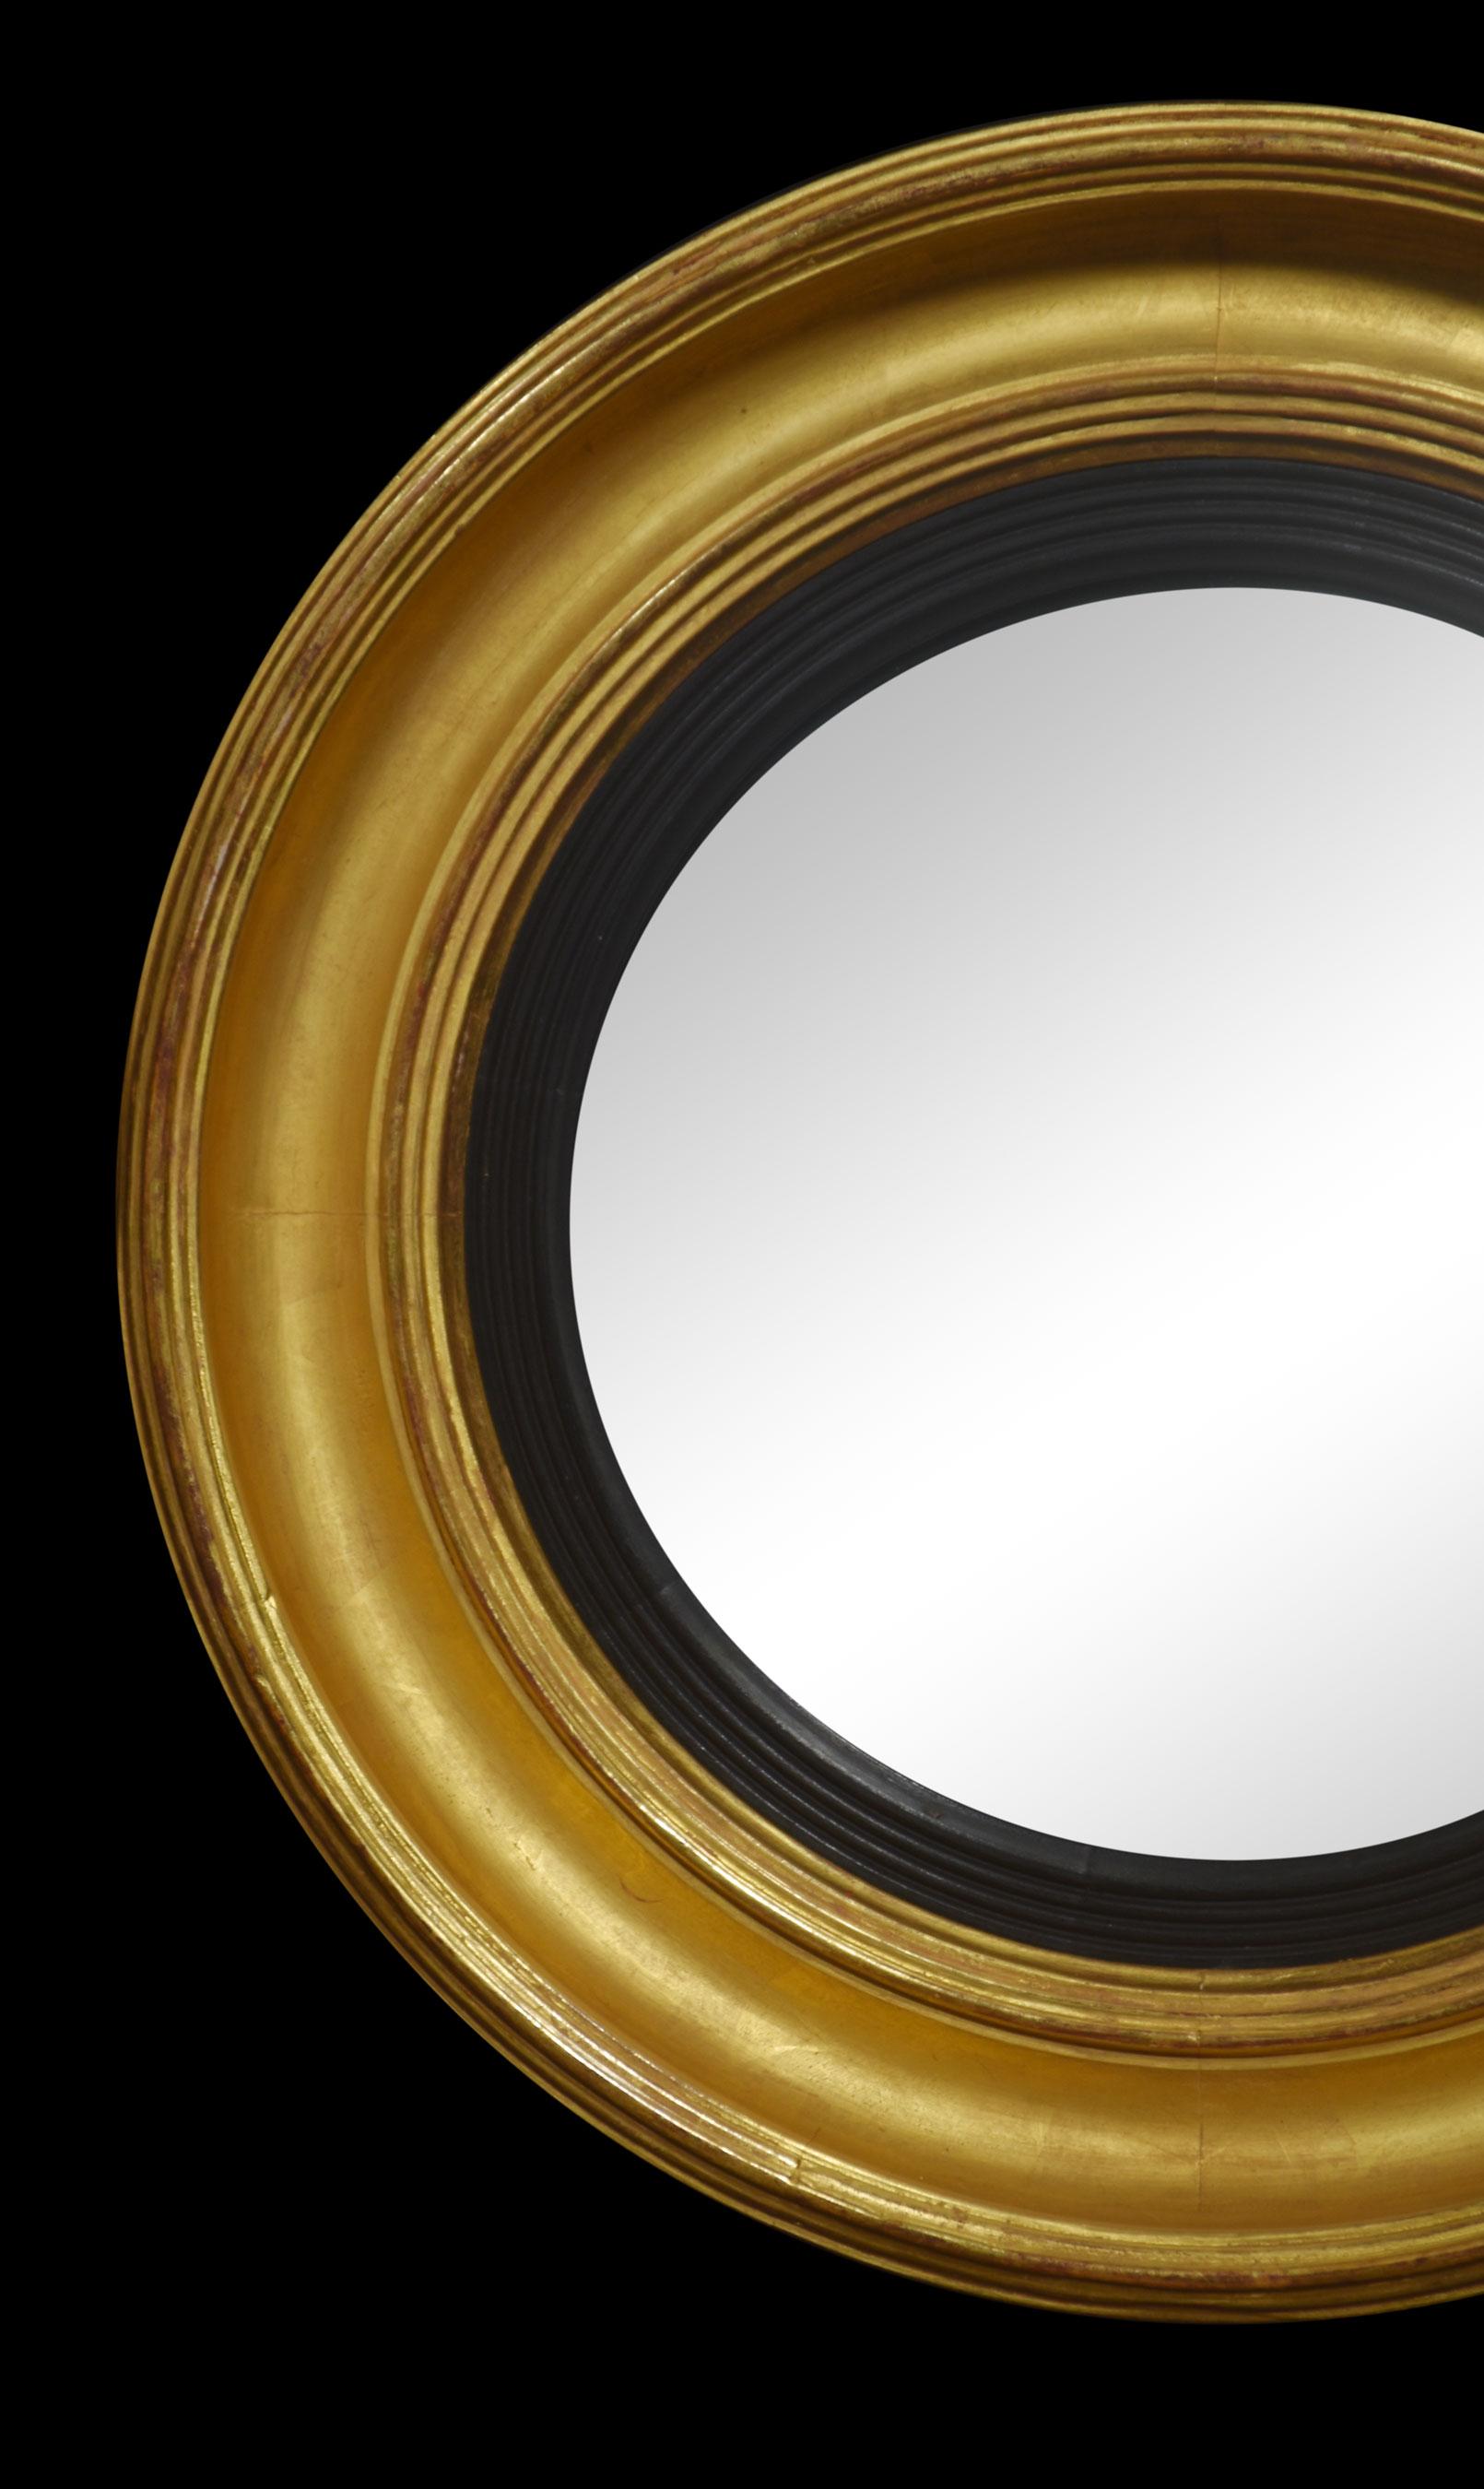 Pair of regency wall mirrors of circular form caving carved giltwood frame and central original convexed mirror encased in ebonised frame. There is some slight pitting to the mirrors consummate with age.
Dimensions
Height 19.5 Inches
Width 19.5